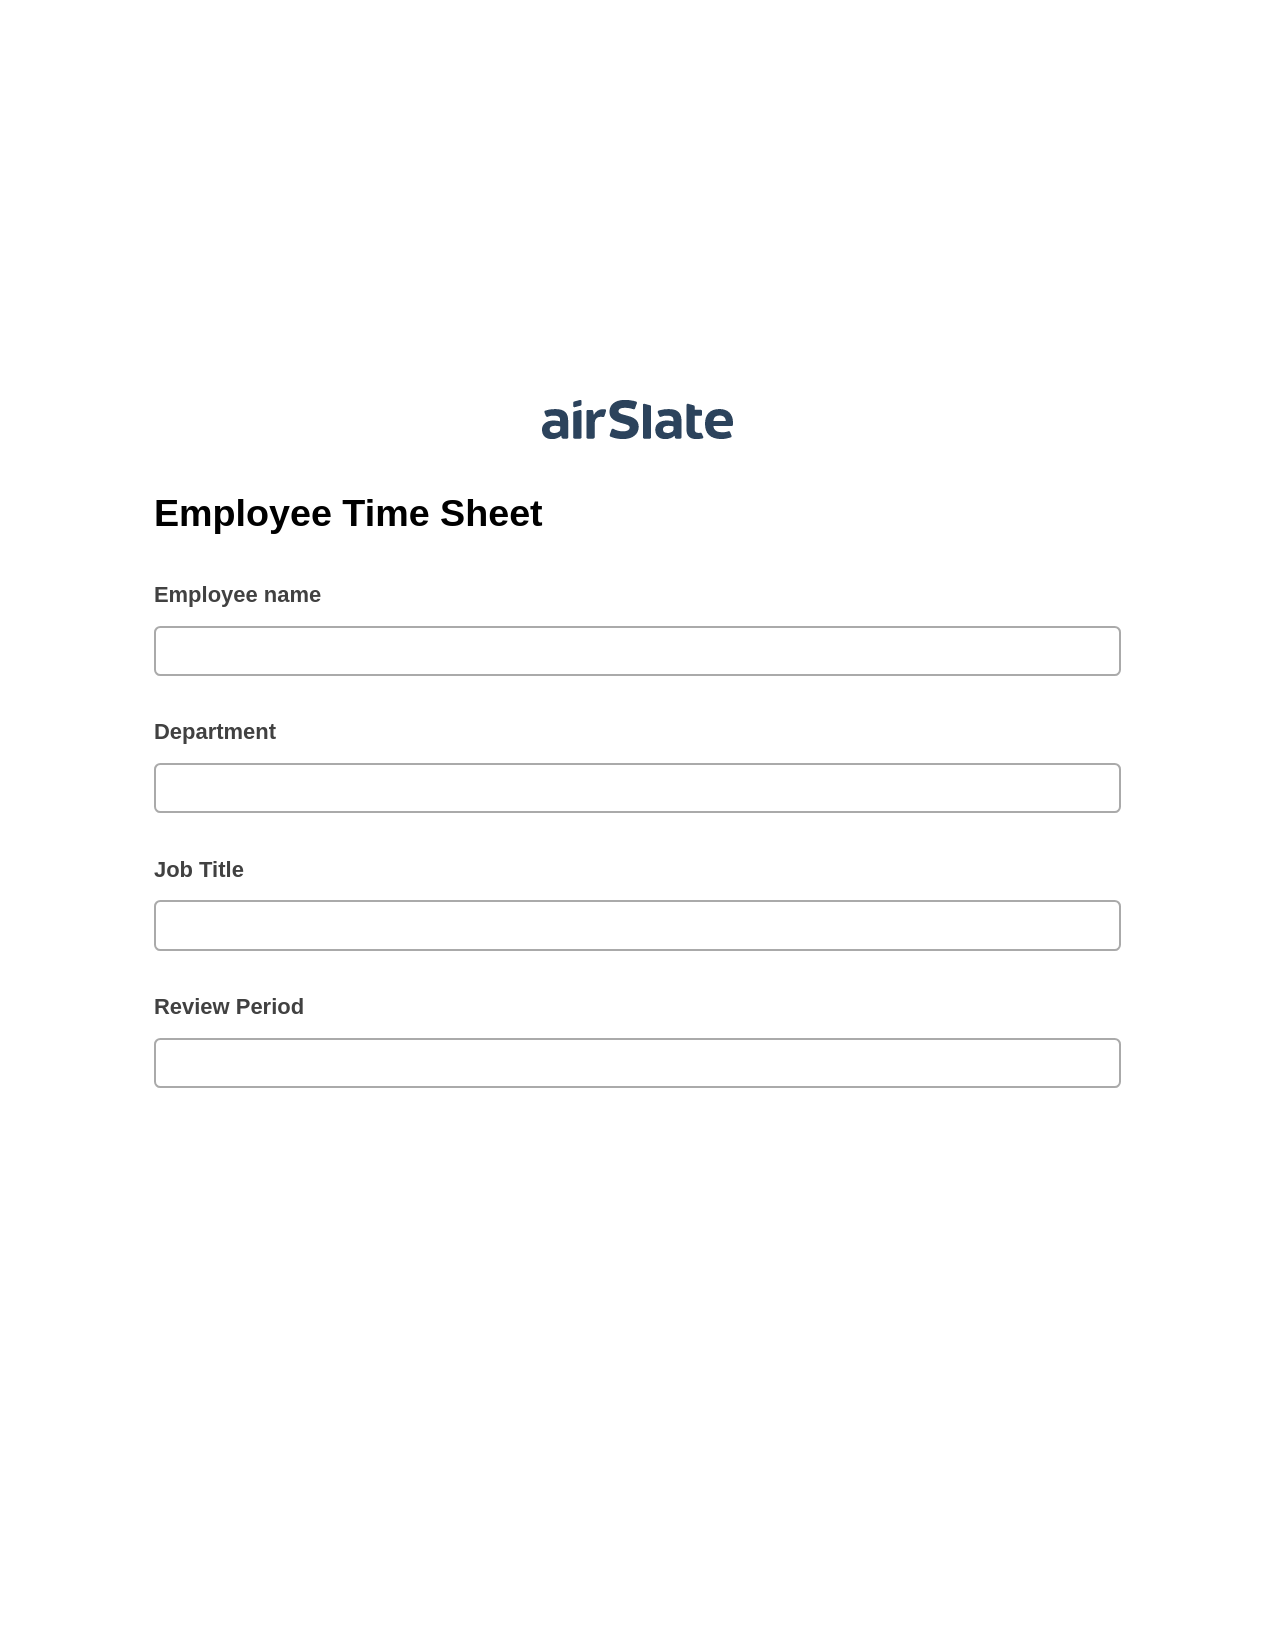 Multirole Employee Time Sheet Pre-fill Dropdowns from CSV file Bot, SendGrid send Campaign bot, Export to NetSuite Bot